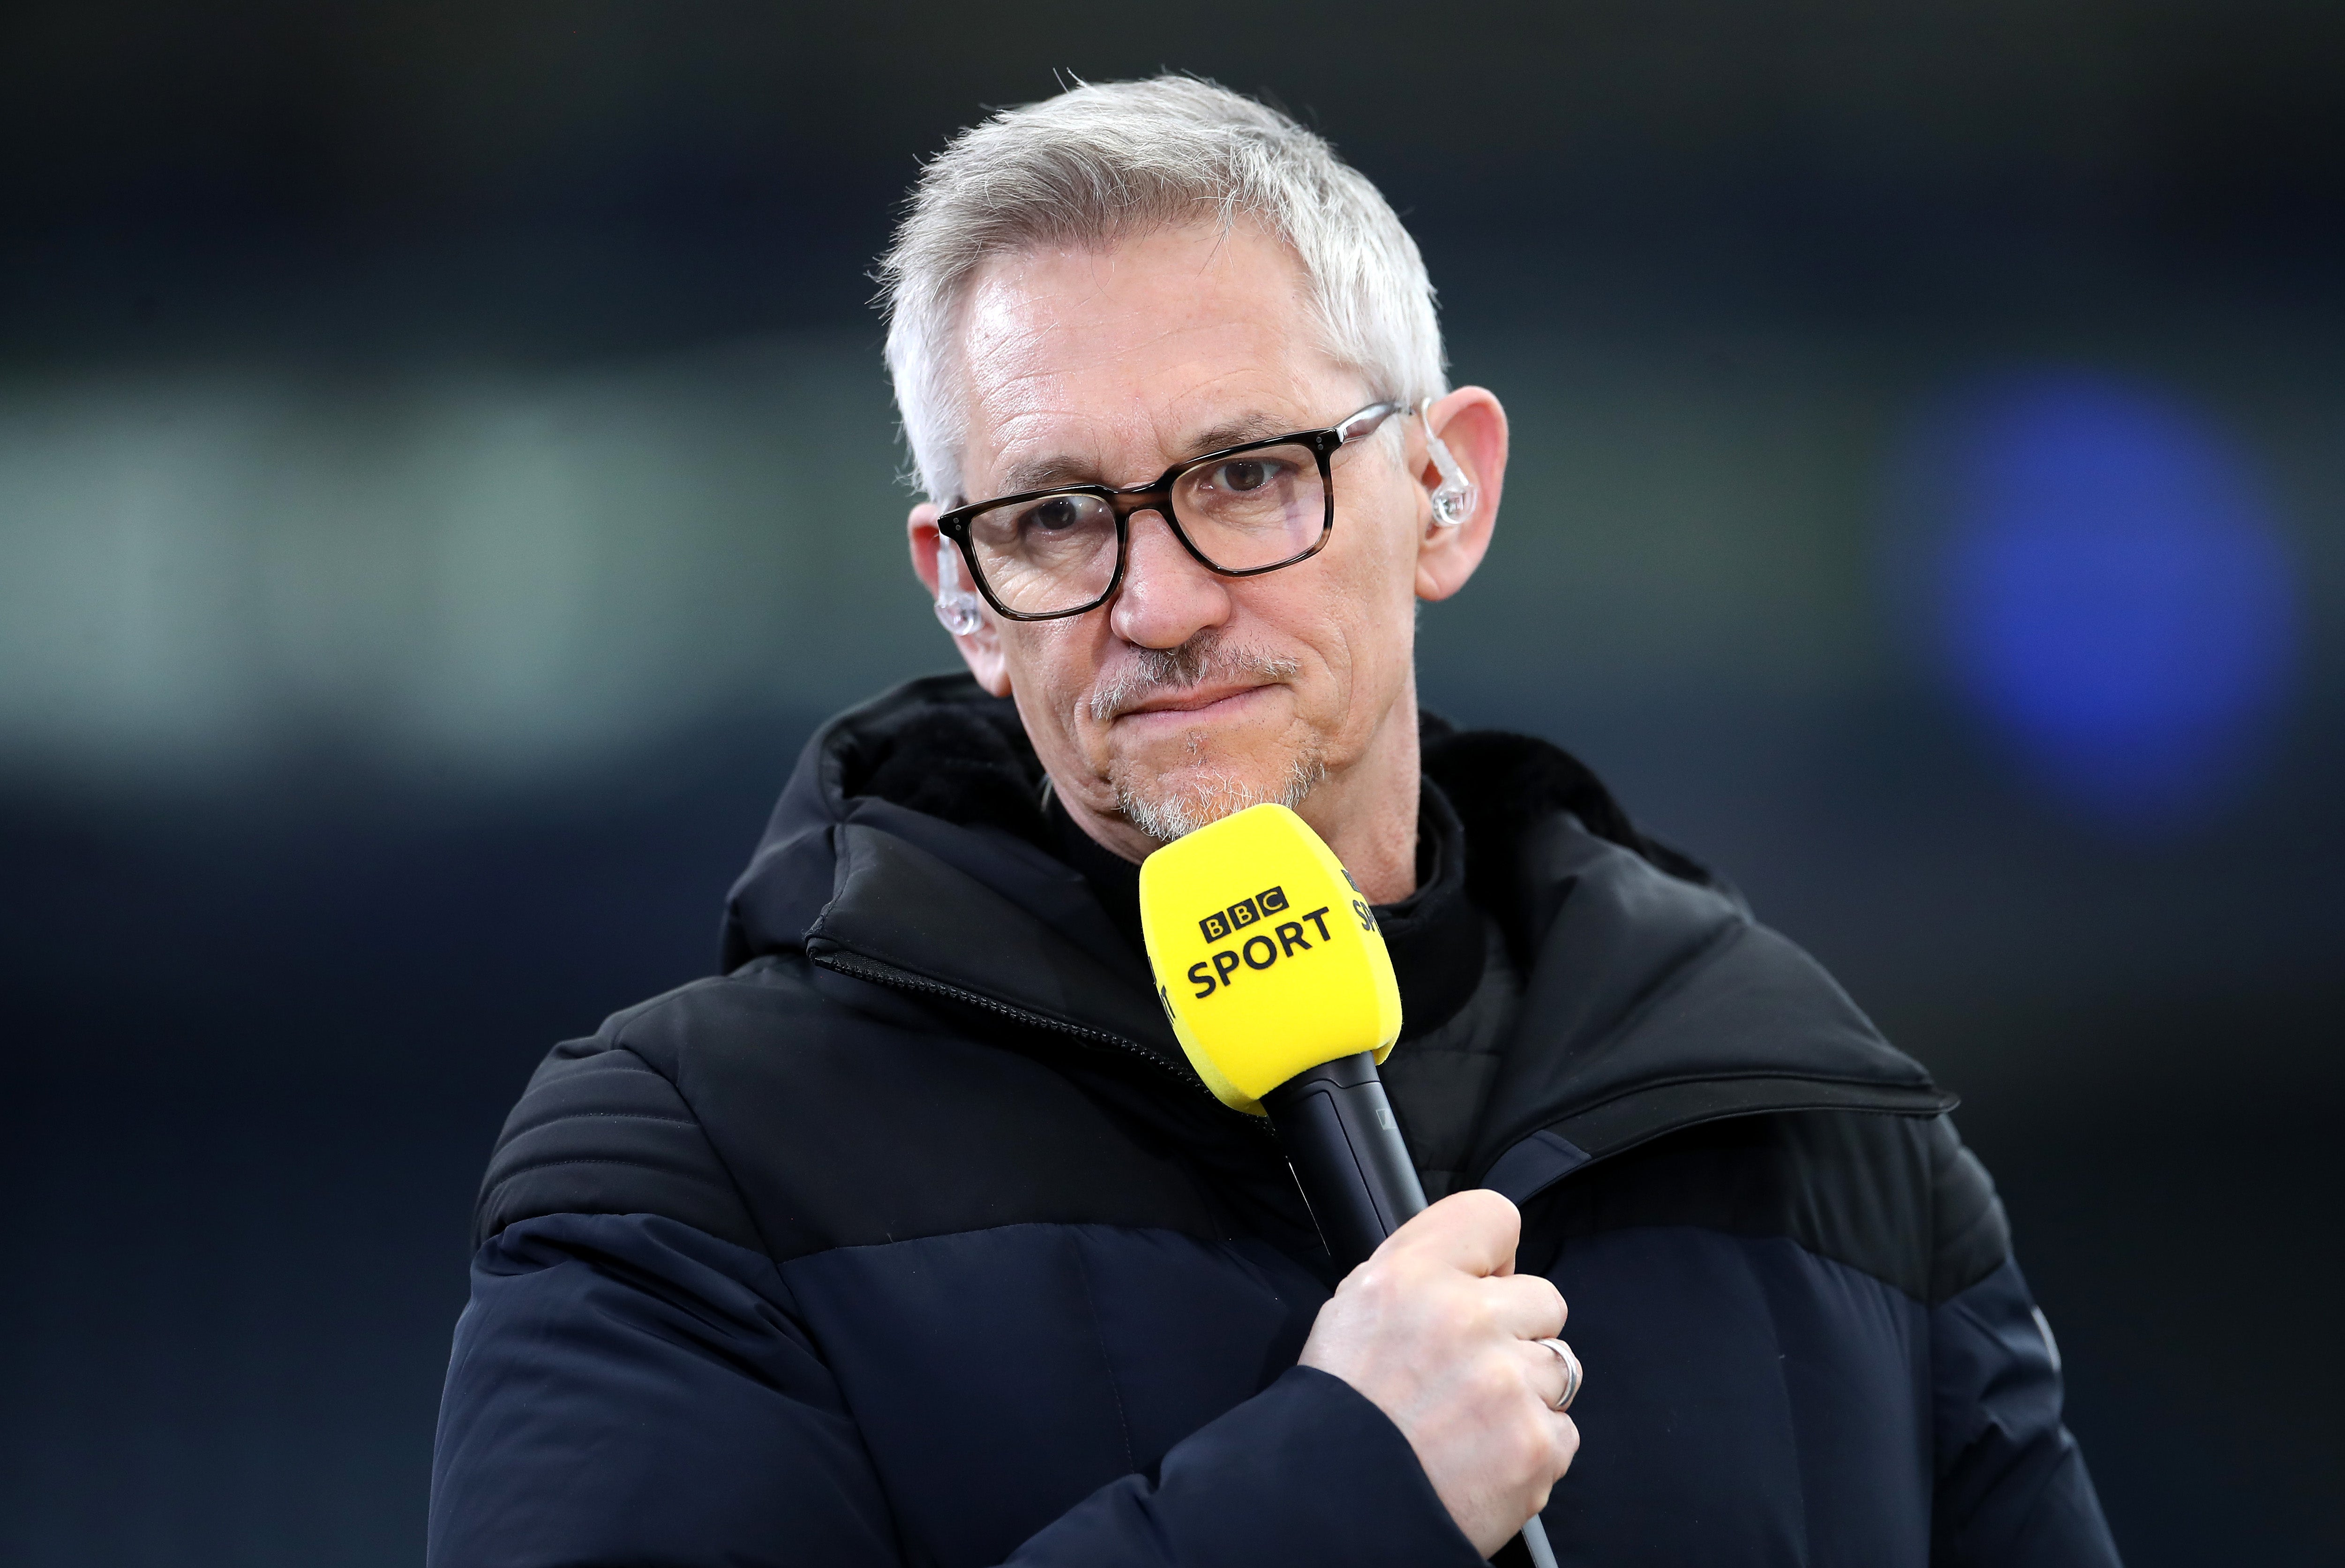 Gary Lineker will not present ‘Match of the Day’ on Saturday